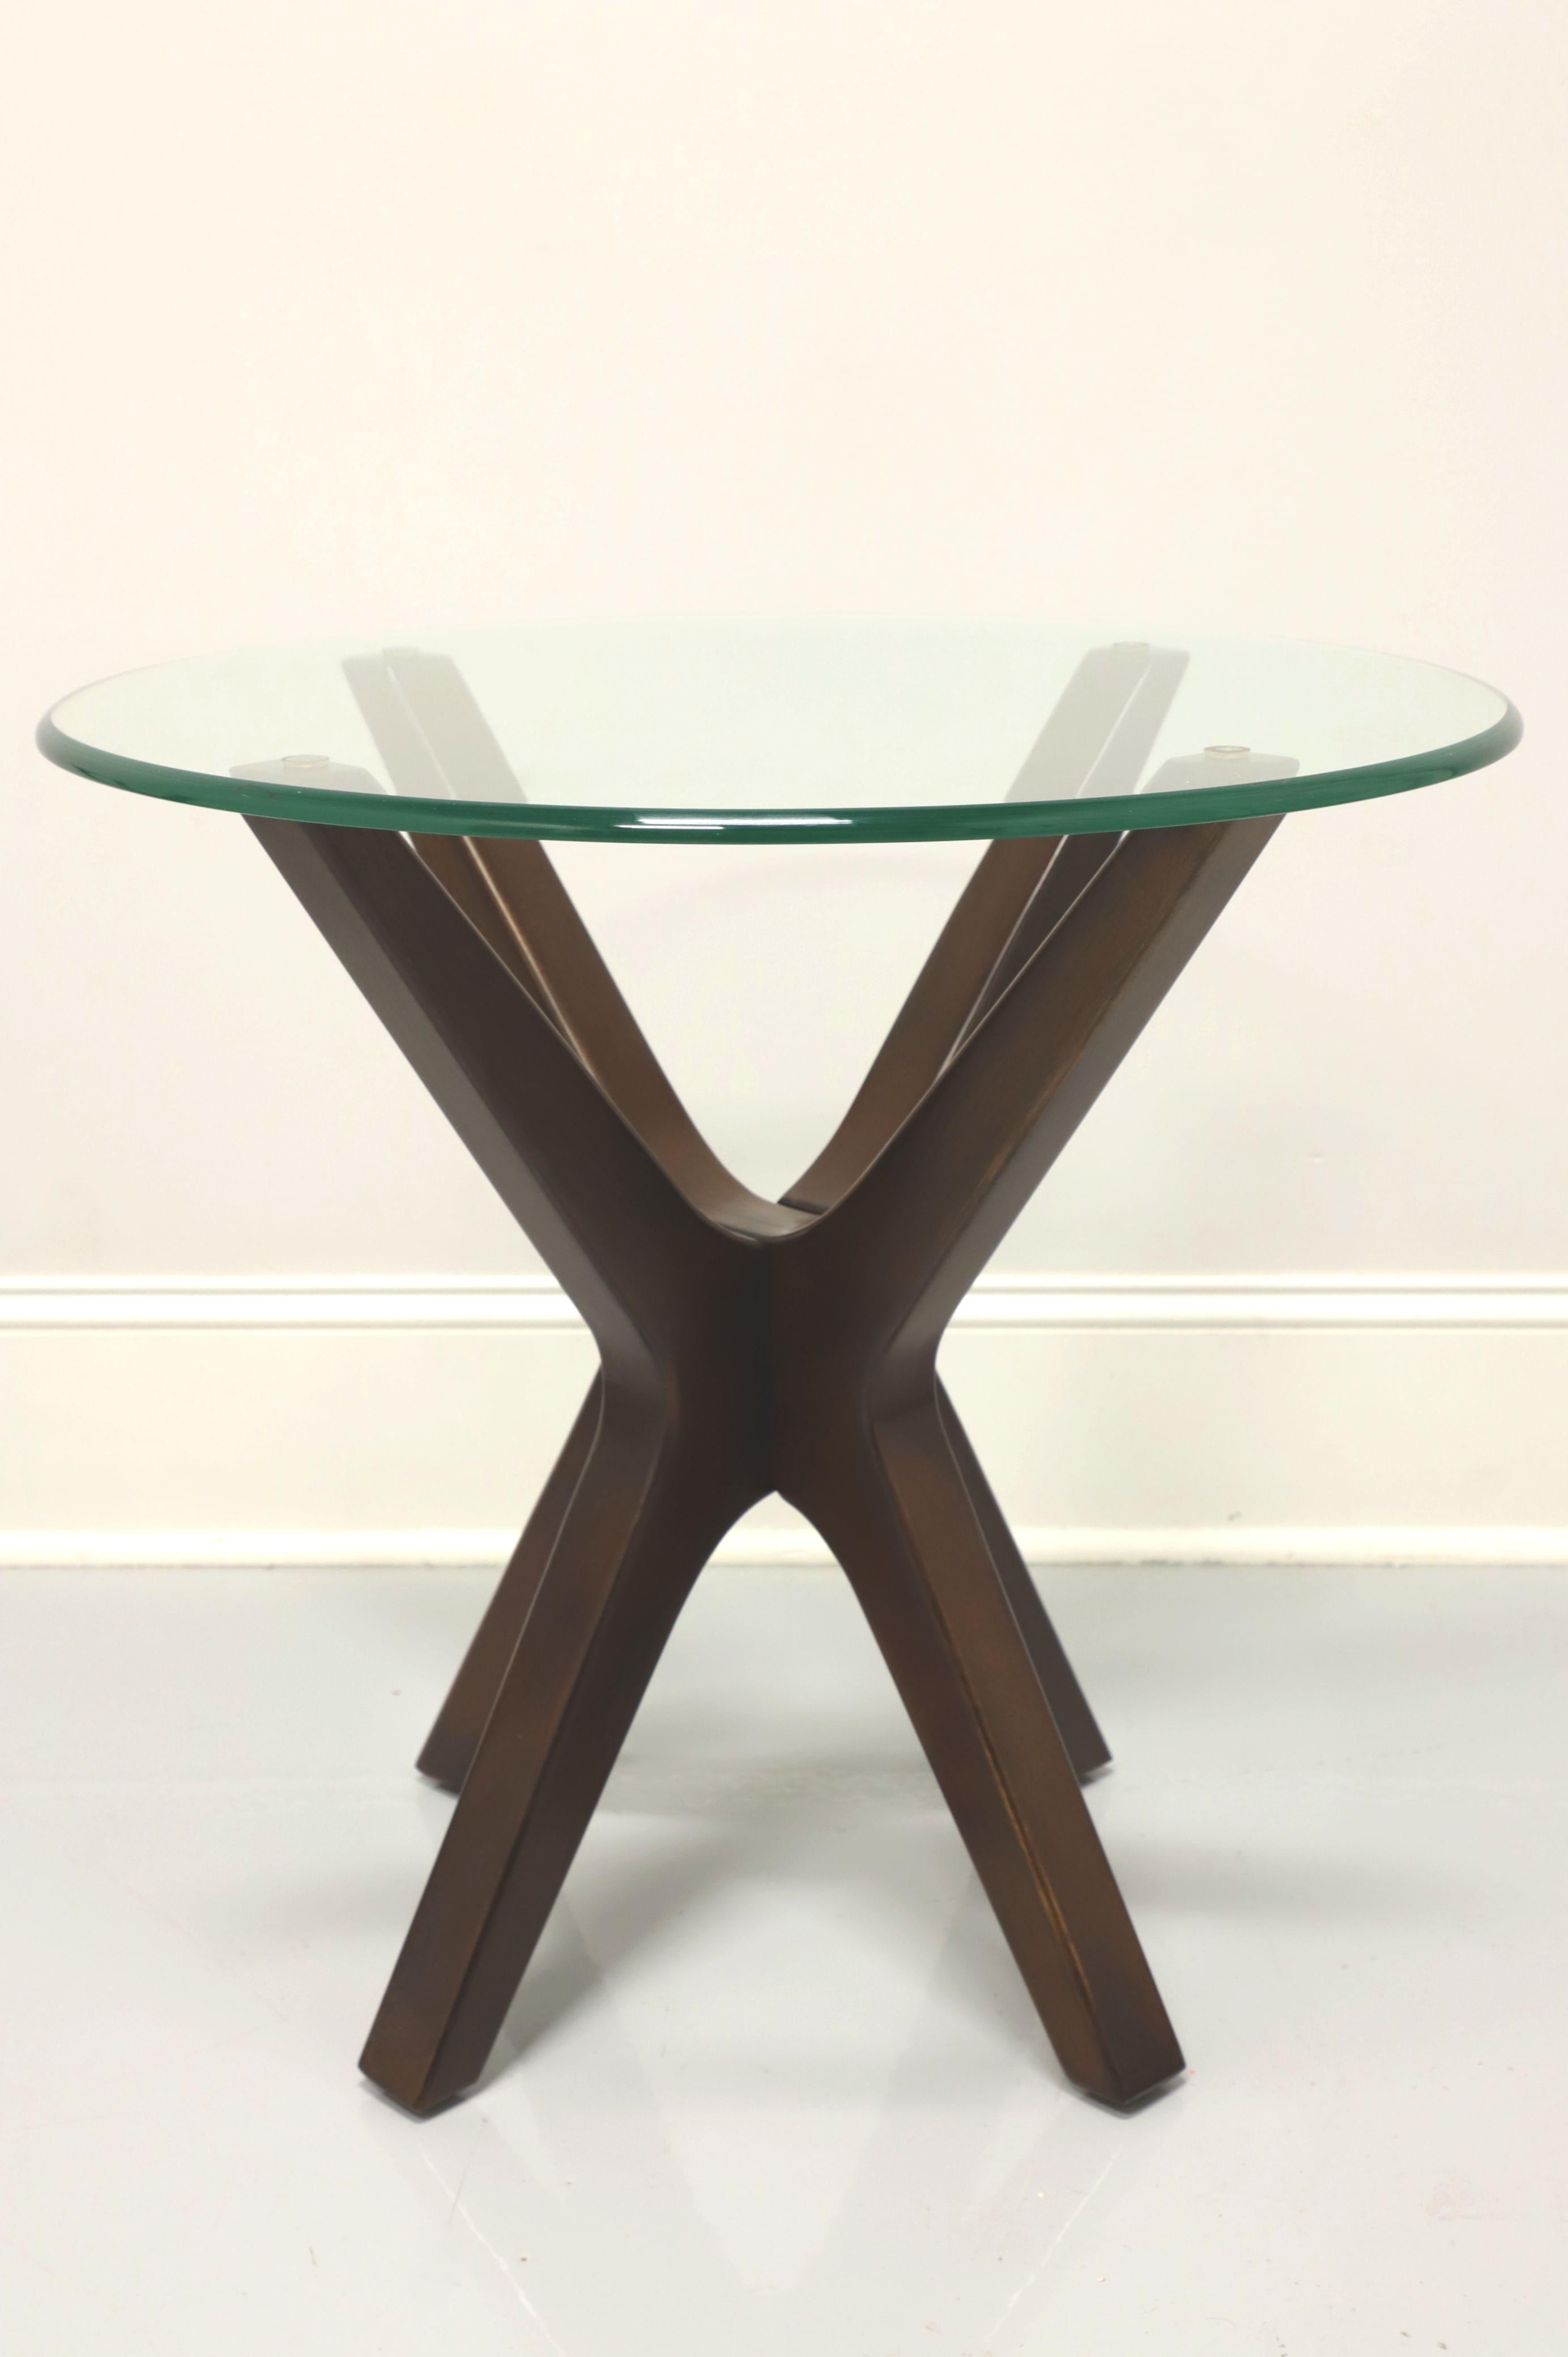 A pair of Contemporary glass top end tables in the style of a classic mid century design by Adrian Pearsall, unbranded. Mahogany base in a crossed 